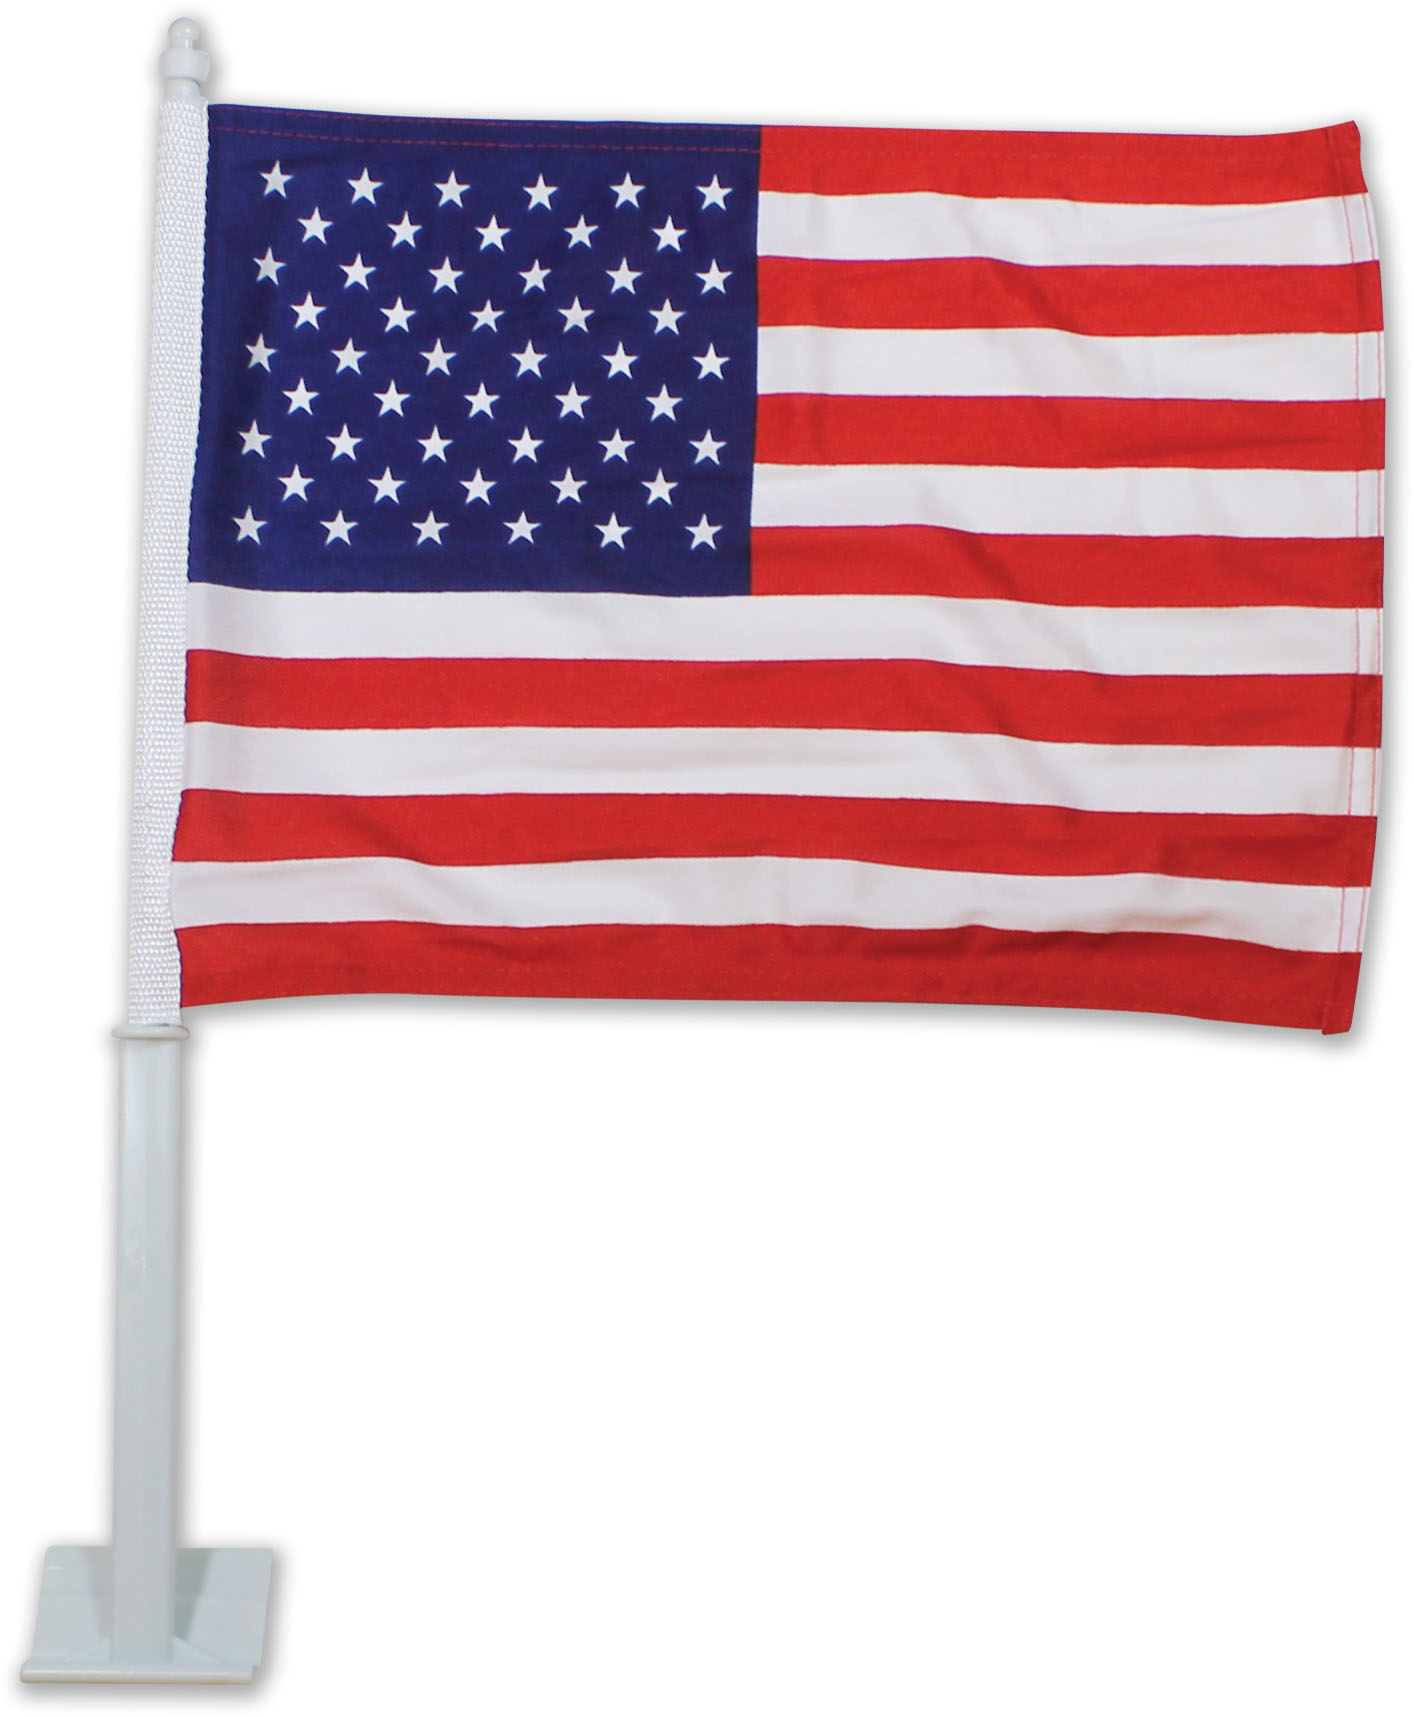 https://carbowstore.org/image/catalog/carfl/flags/USFOL.jpg